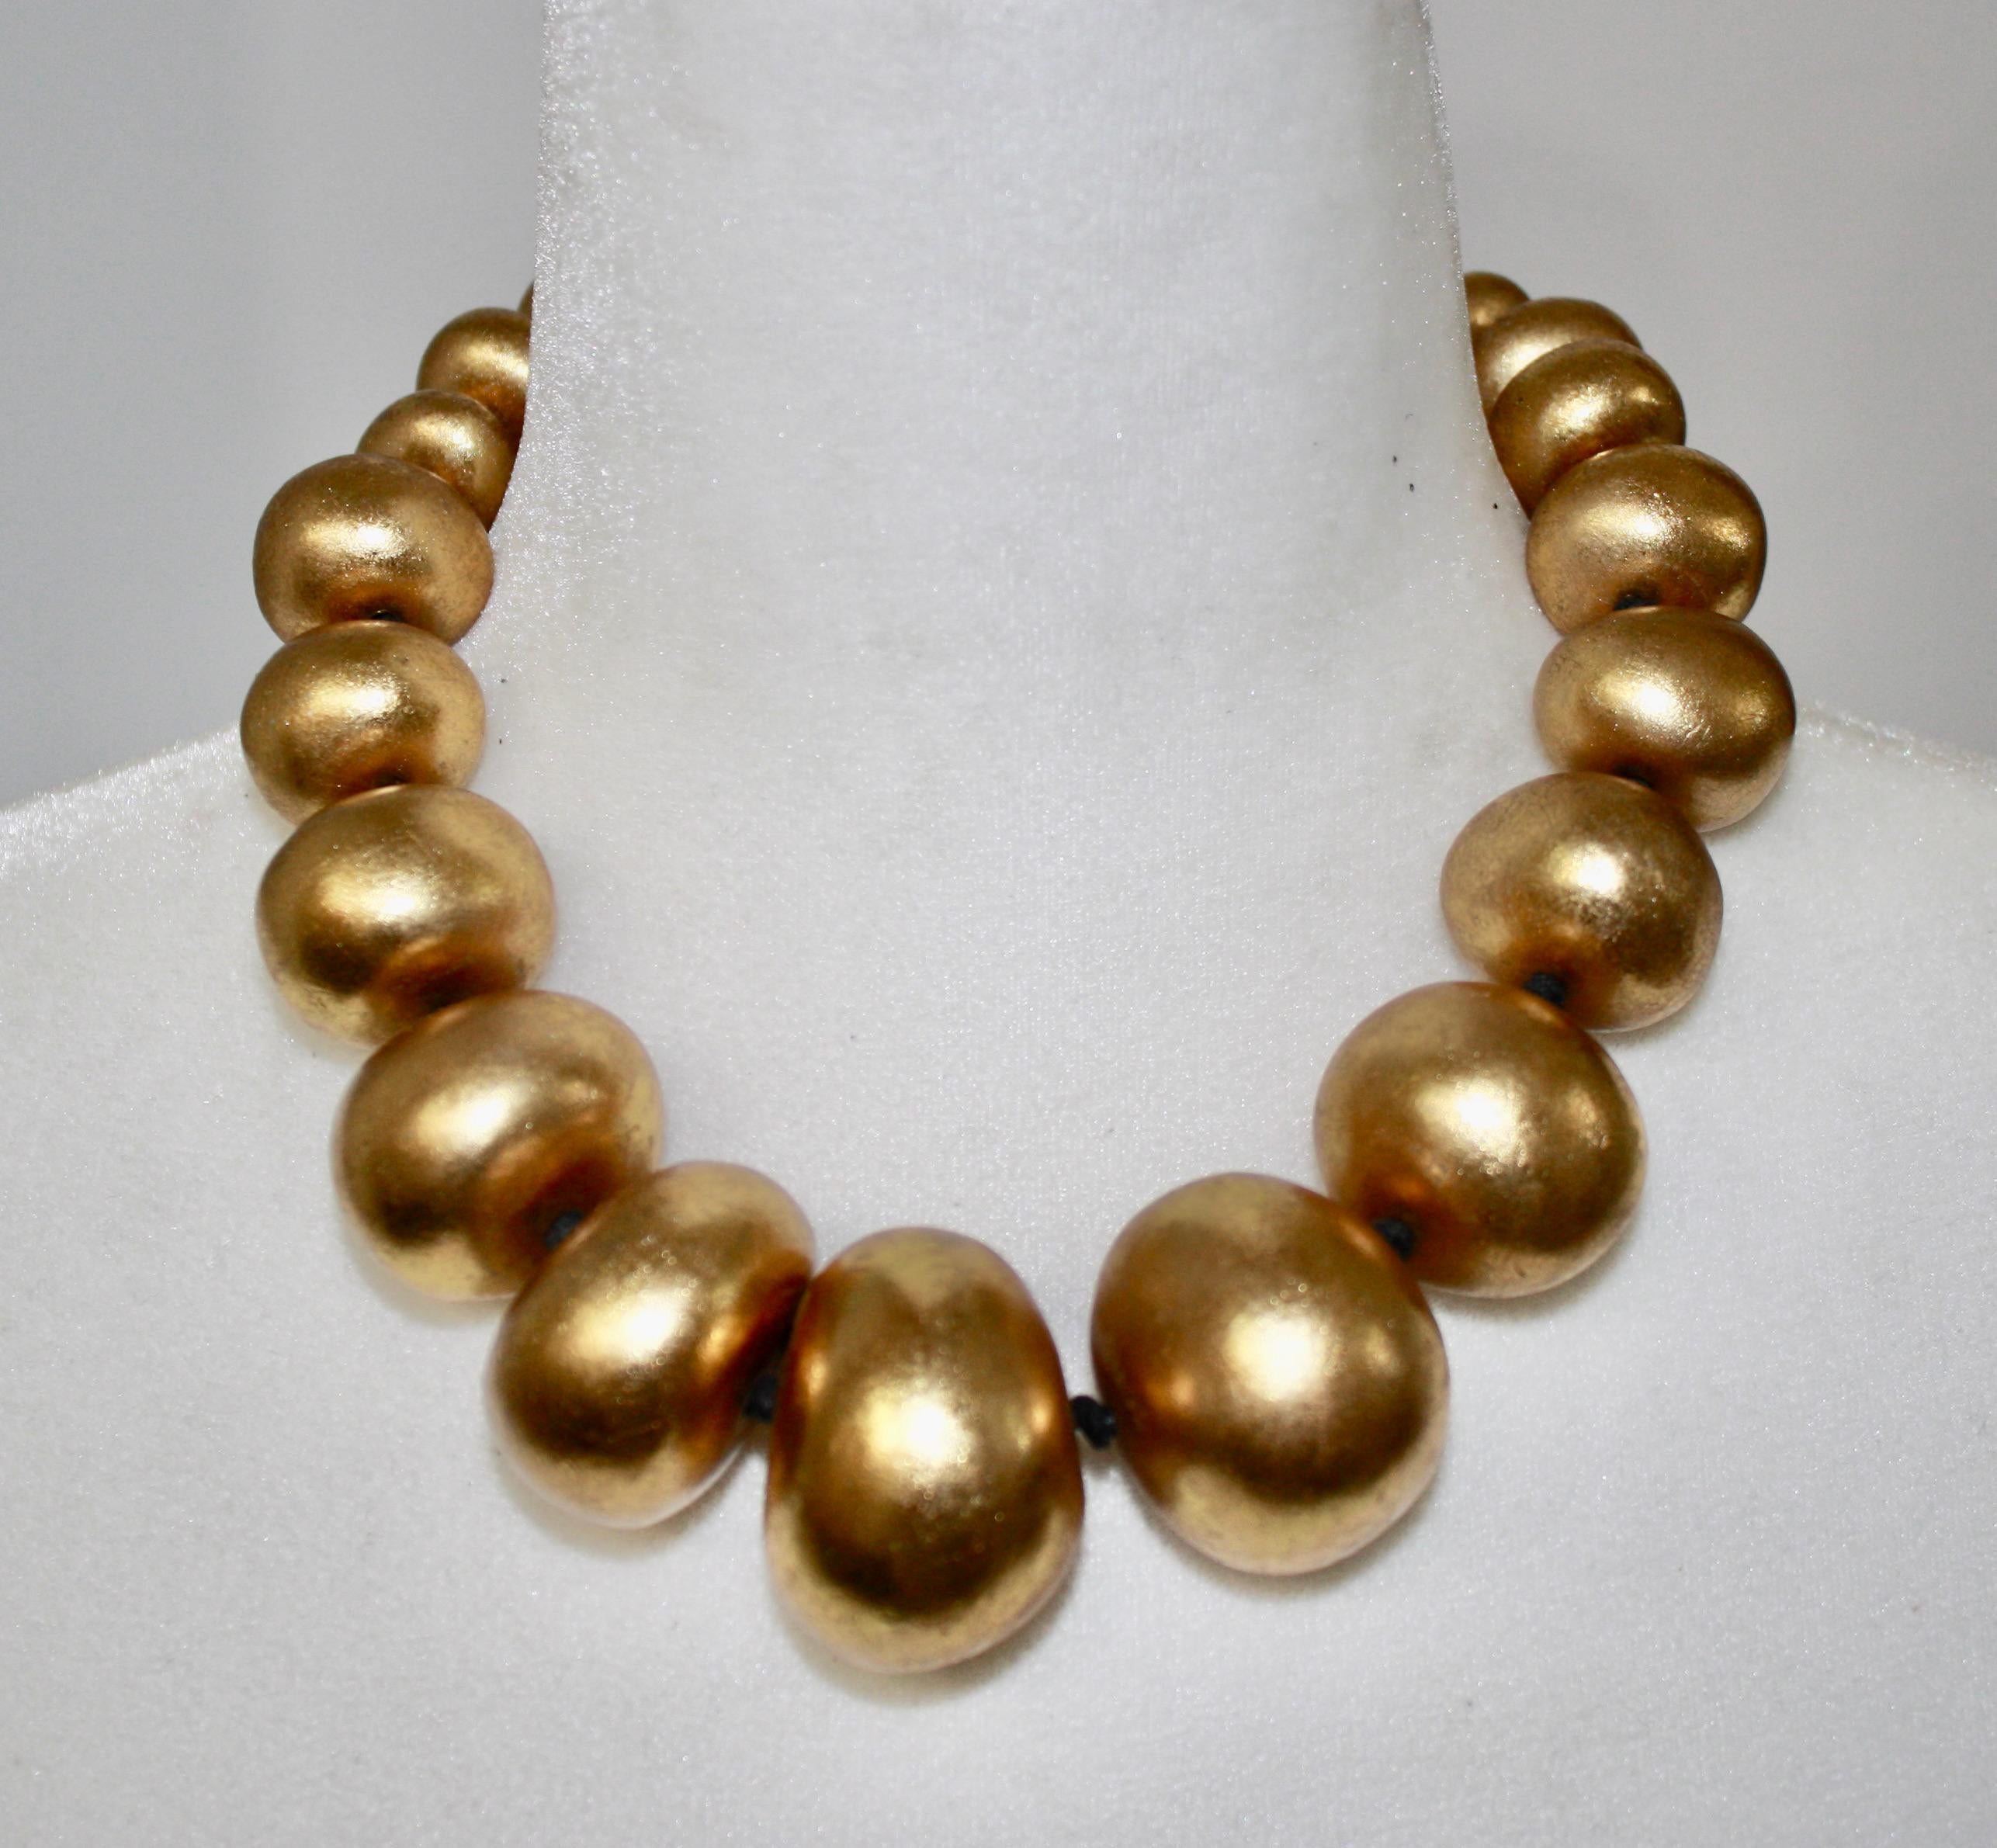 Gold tone wood beaded necklace with toggle clasp. Signature on clasp. A classic in monies collection